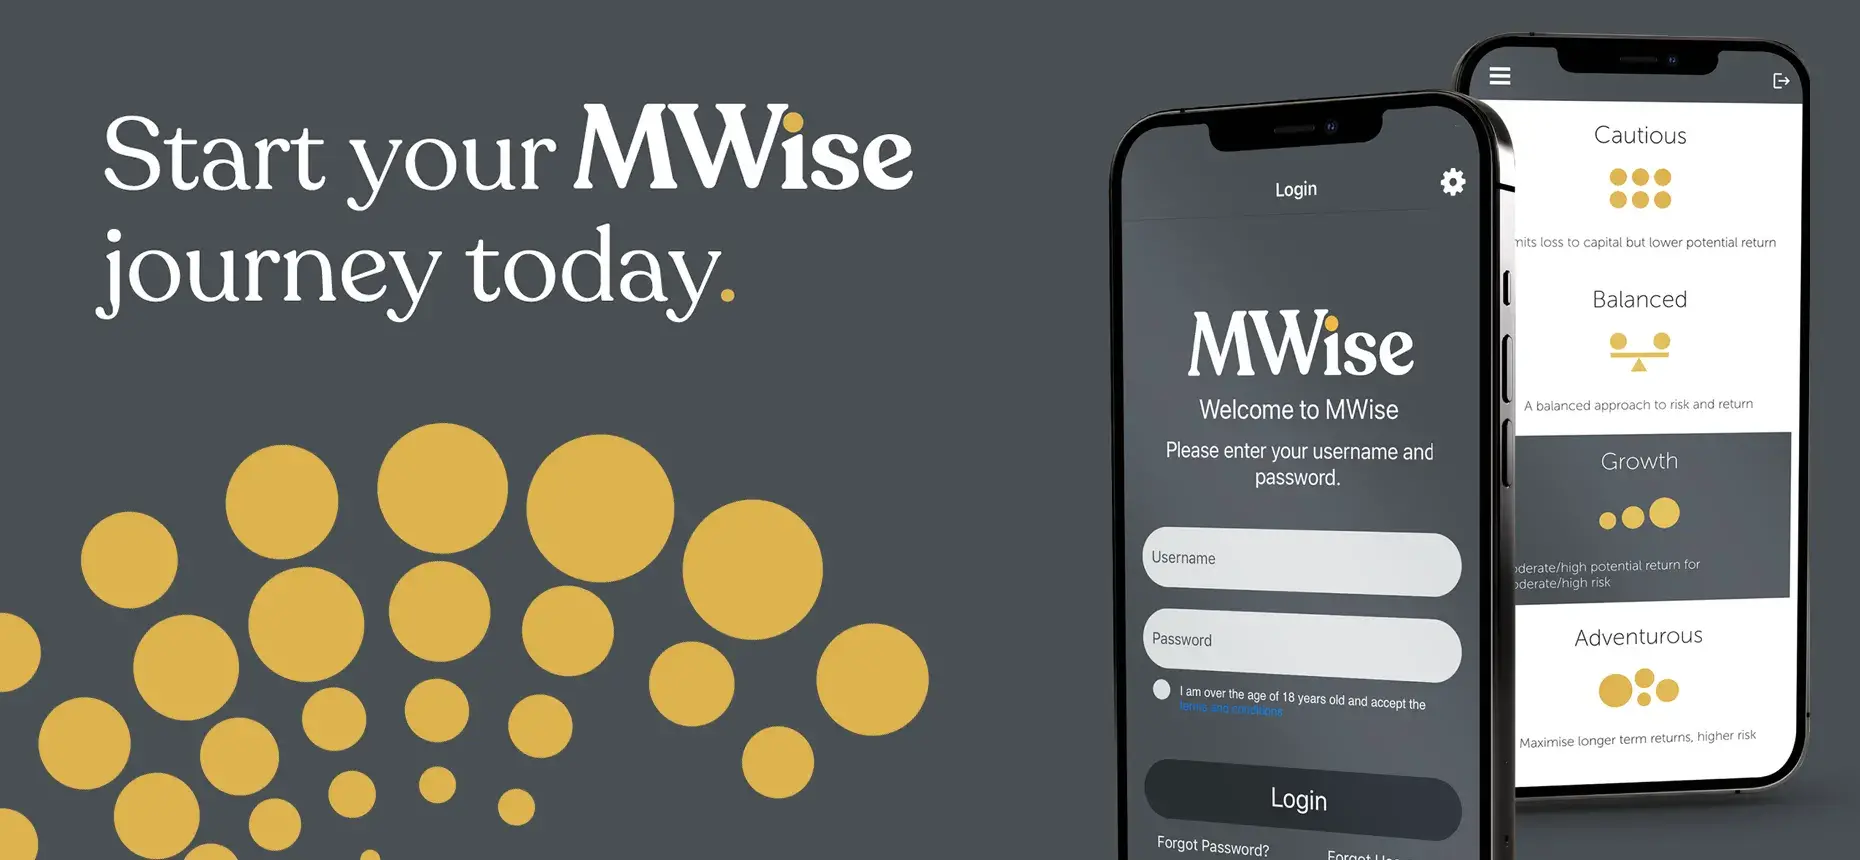 MWise app banner